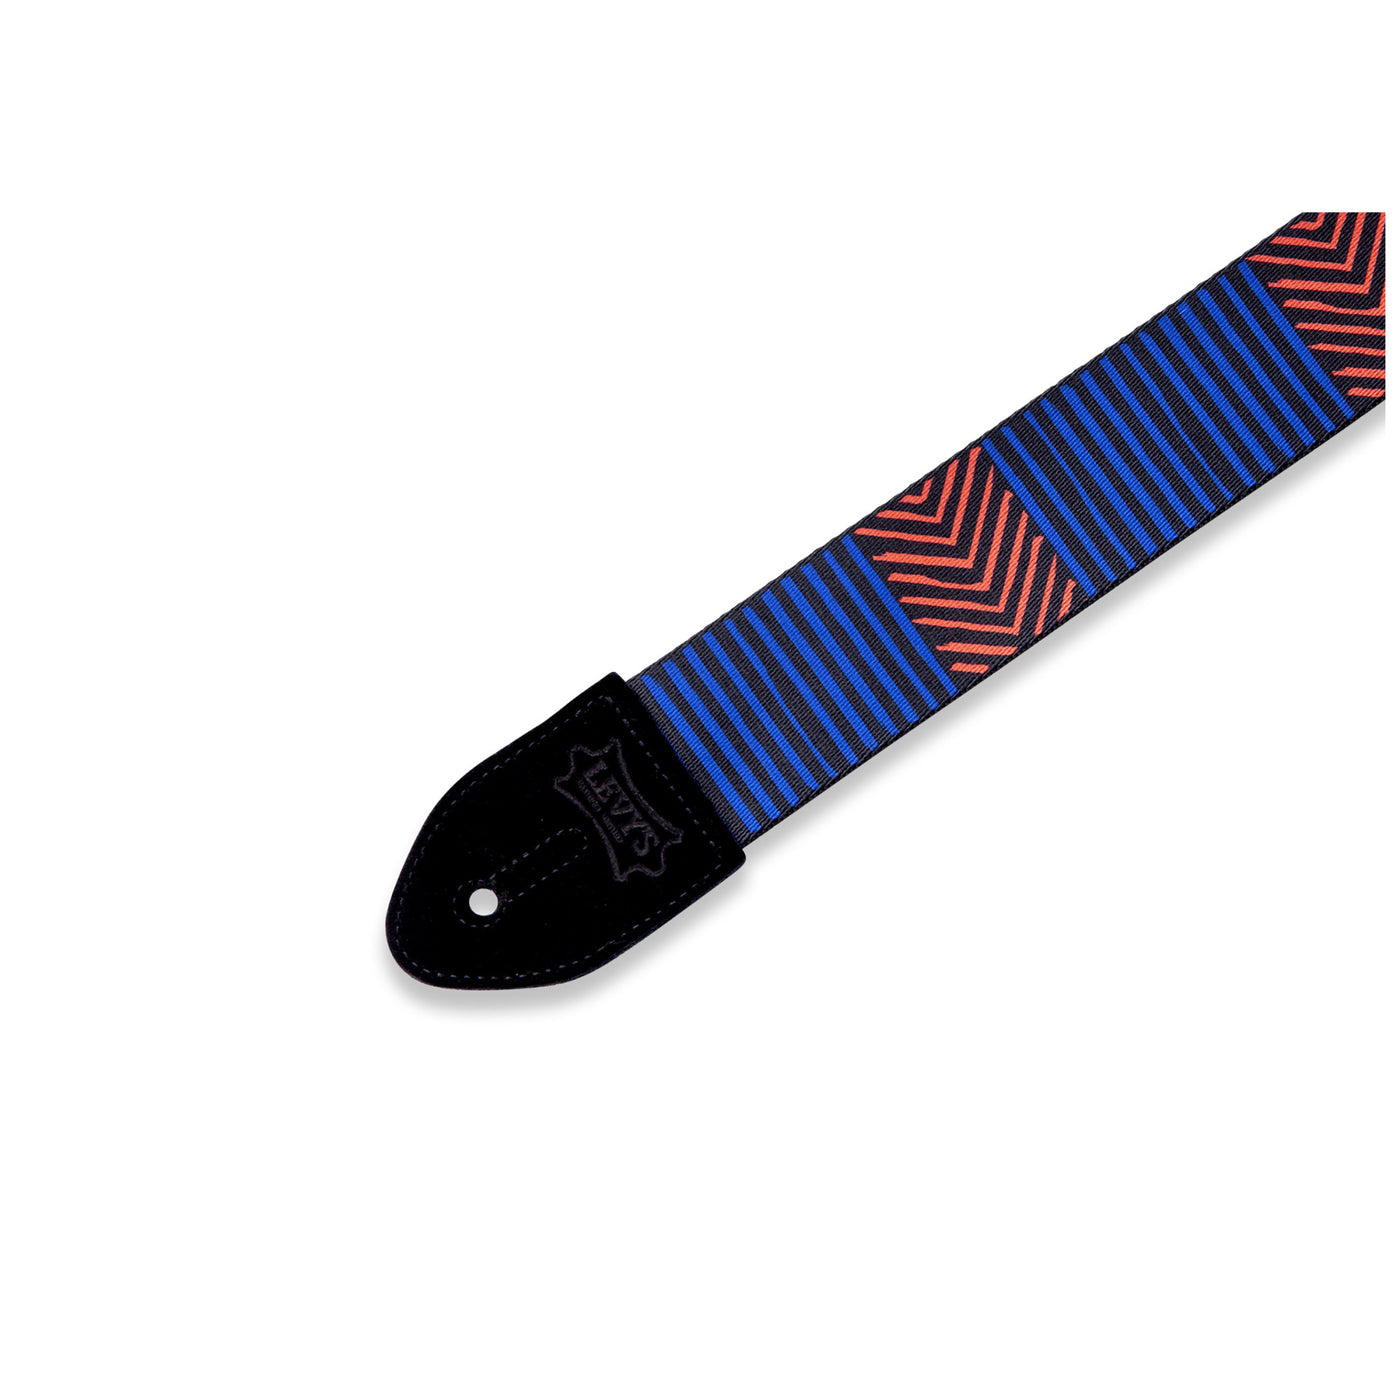 Levy's 2" Print Strap in Tribal Chevron - Black, Blue and Red